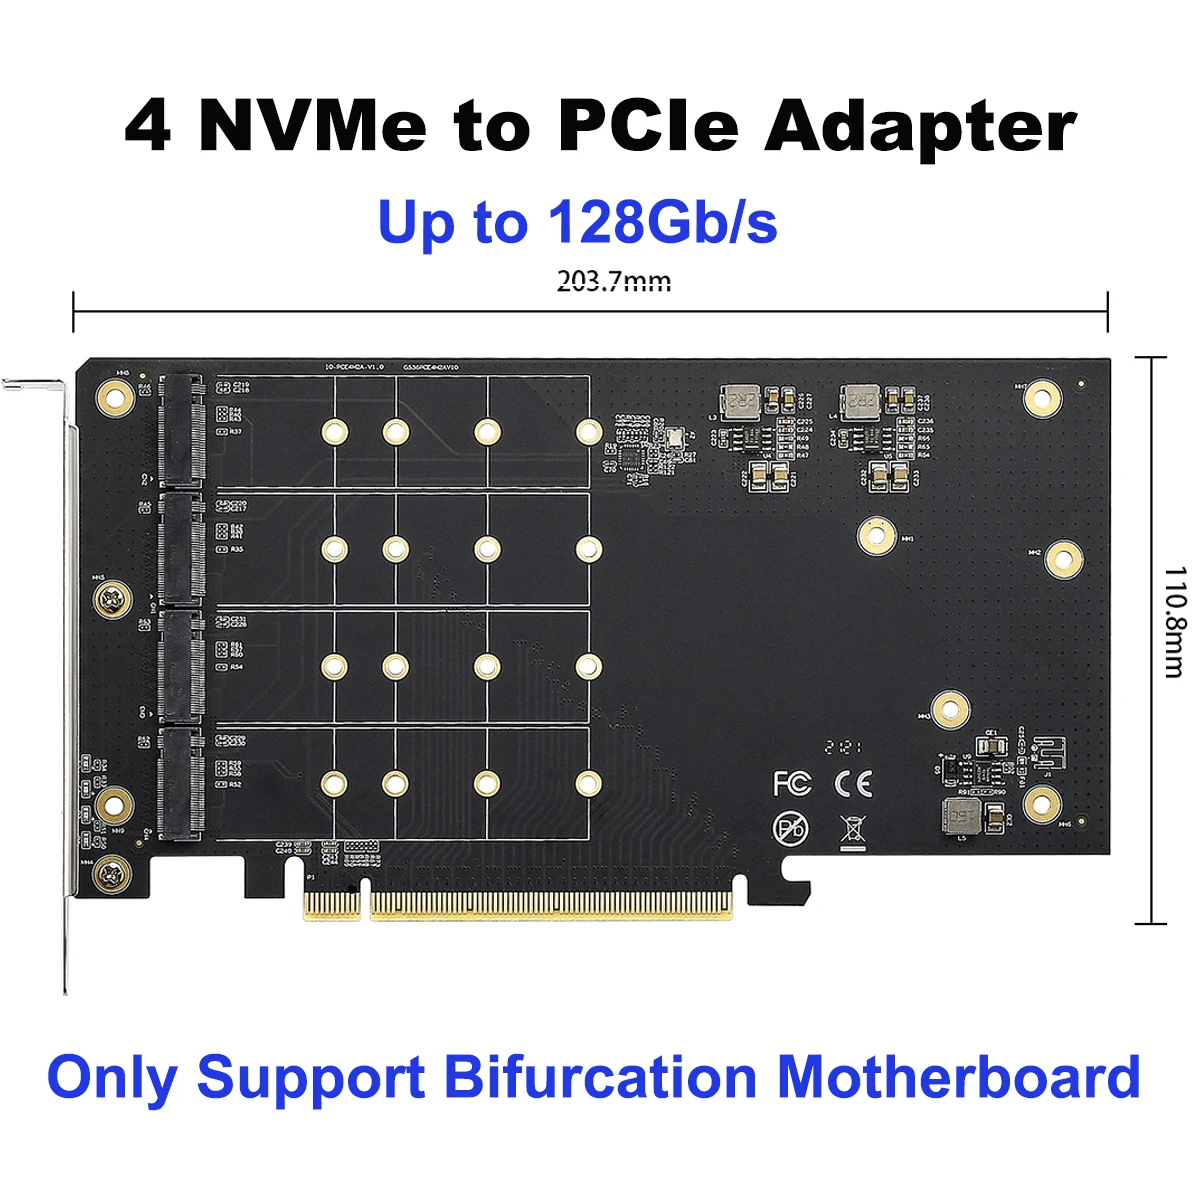 

4 SSD M.2 X16 PCIe 3.0 X4 Expansion Card with Heatsink Supports 4 NVMe M.2 2280 Up to 128Gbps Support Bifurcation Motherboard